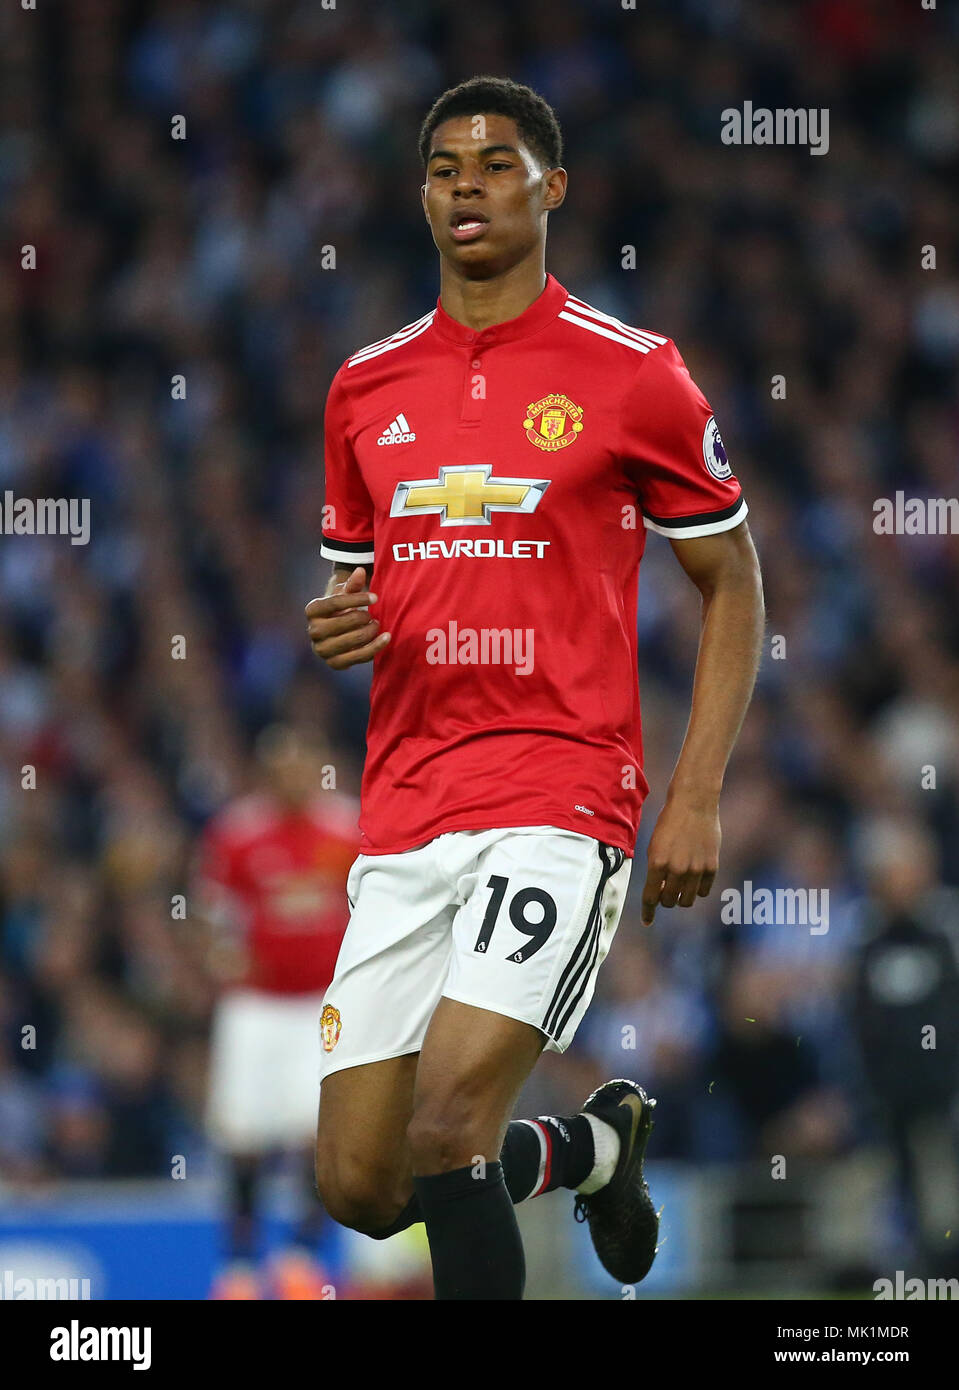 Marcus Rashford of Manchester United during the Premier League match between Brighton and Hove Albion and Manchester United at the American Express Community Stadium in Brighton and Hove. 04 May 2018 *** EDITORIAL USE ONLY ***  No merchandising. For Football images FA and Premier League restrictions apply inc. no internet/mobile usage without FAPL license - for details contact Football Dataco Stock Photo